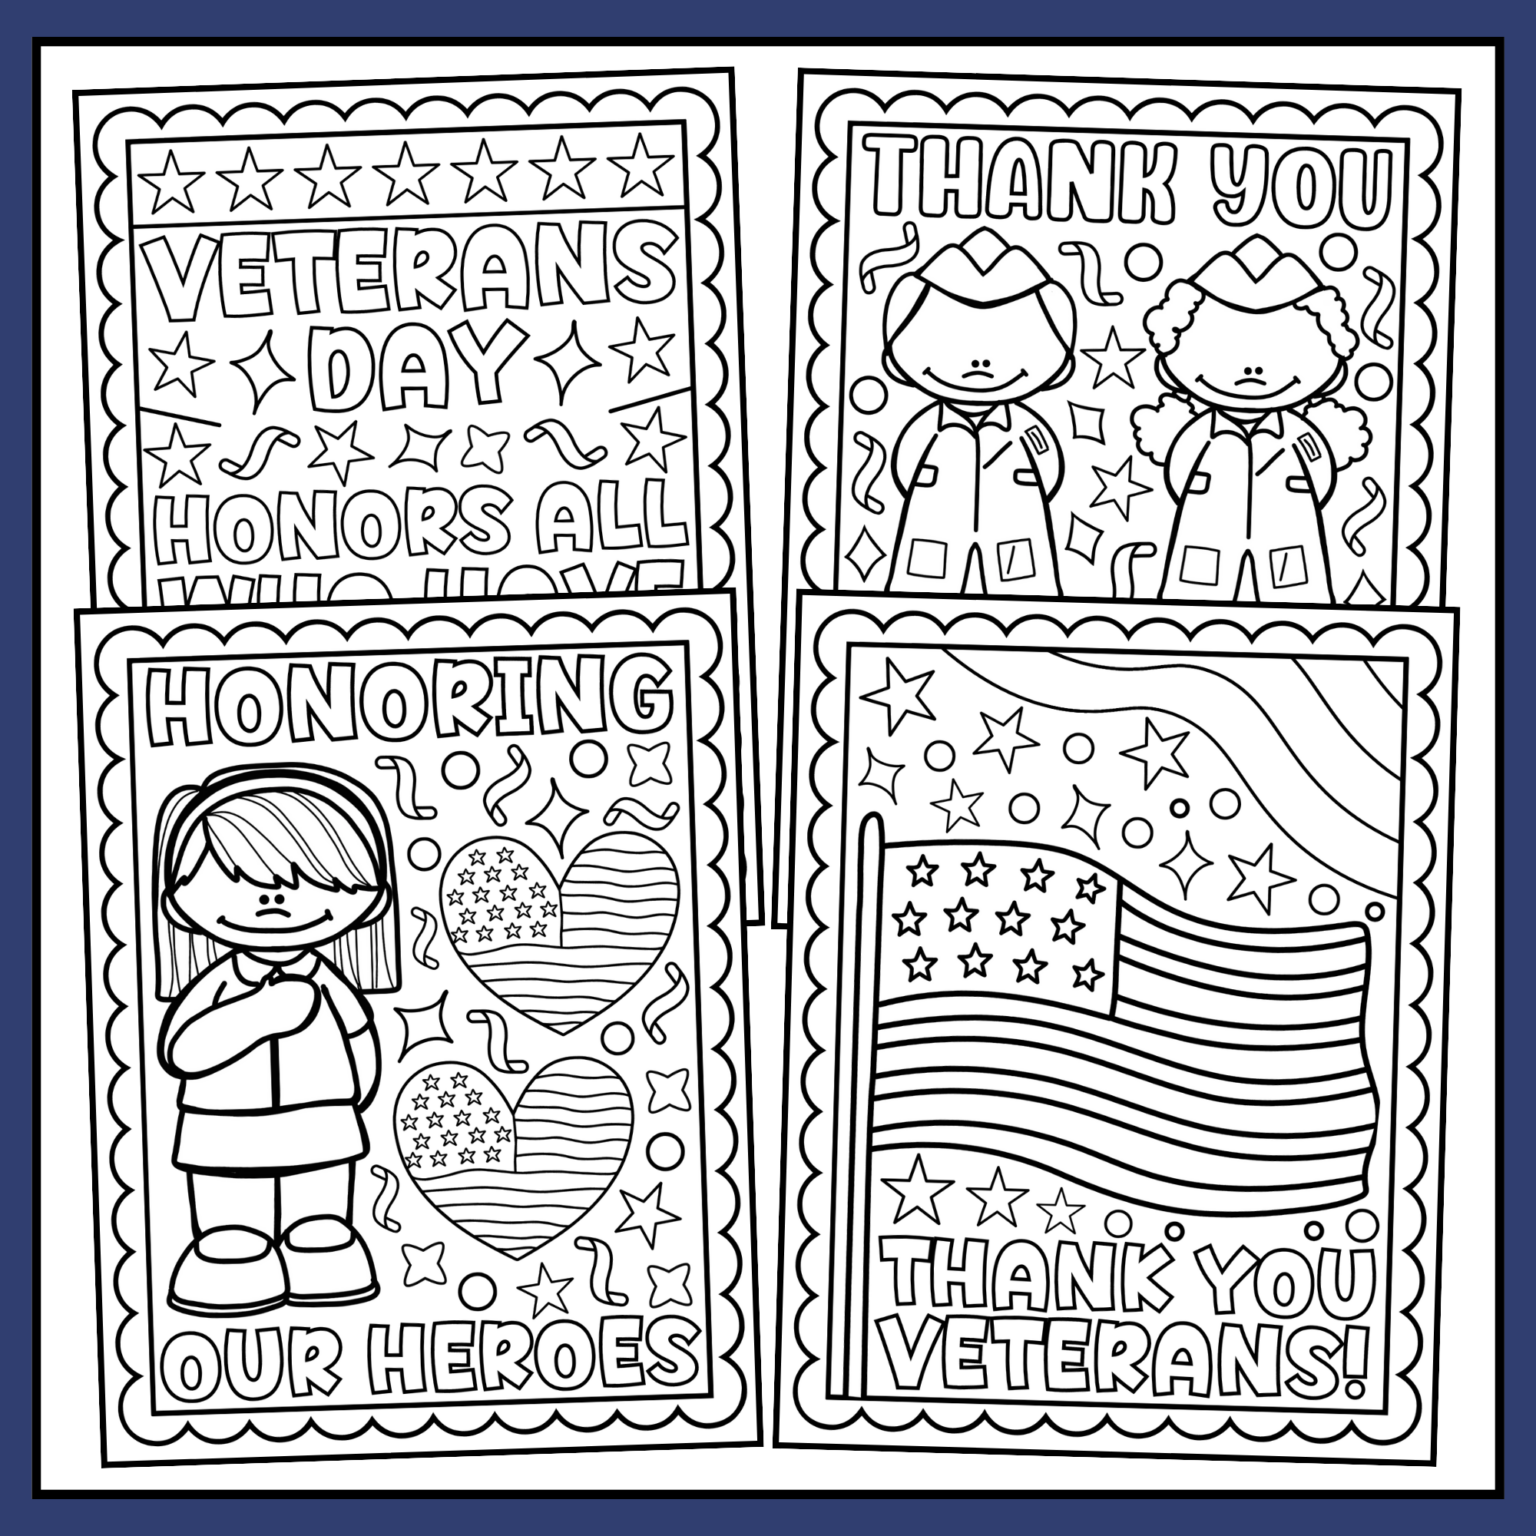 Veterans day coloring pages â veterans day coloring sheets â veterans day activities made by teachers